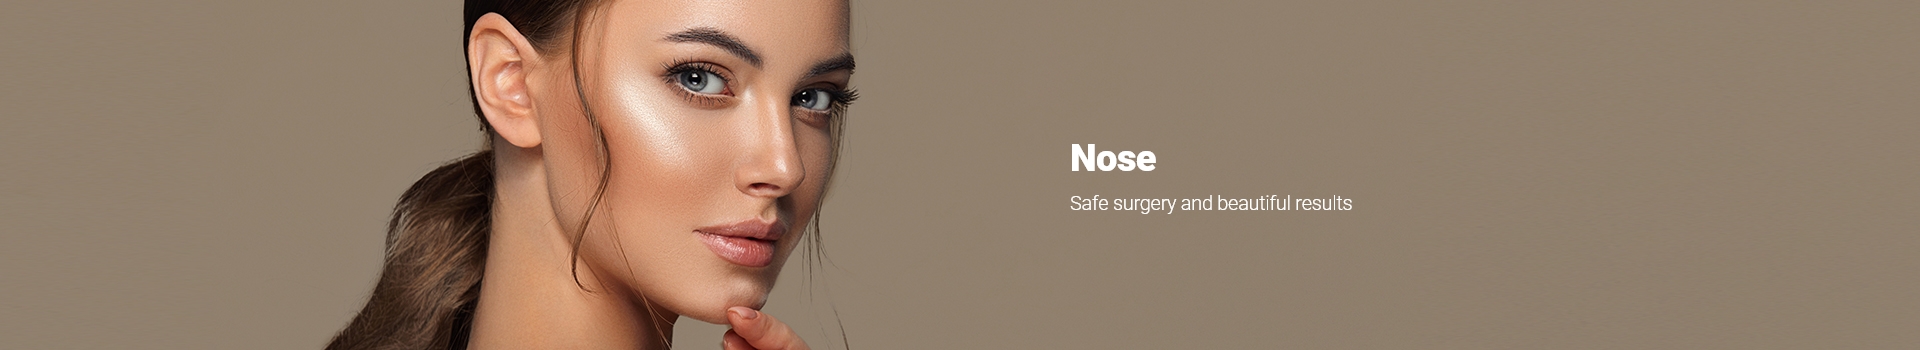 Nose Safe surgery and beautiful results